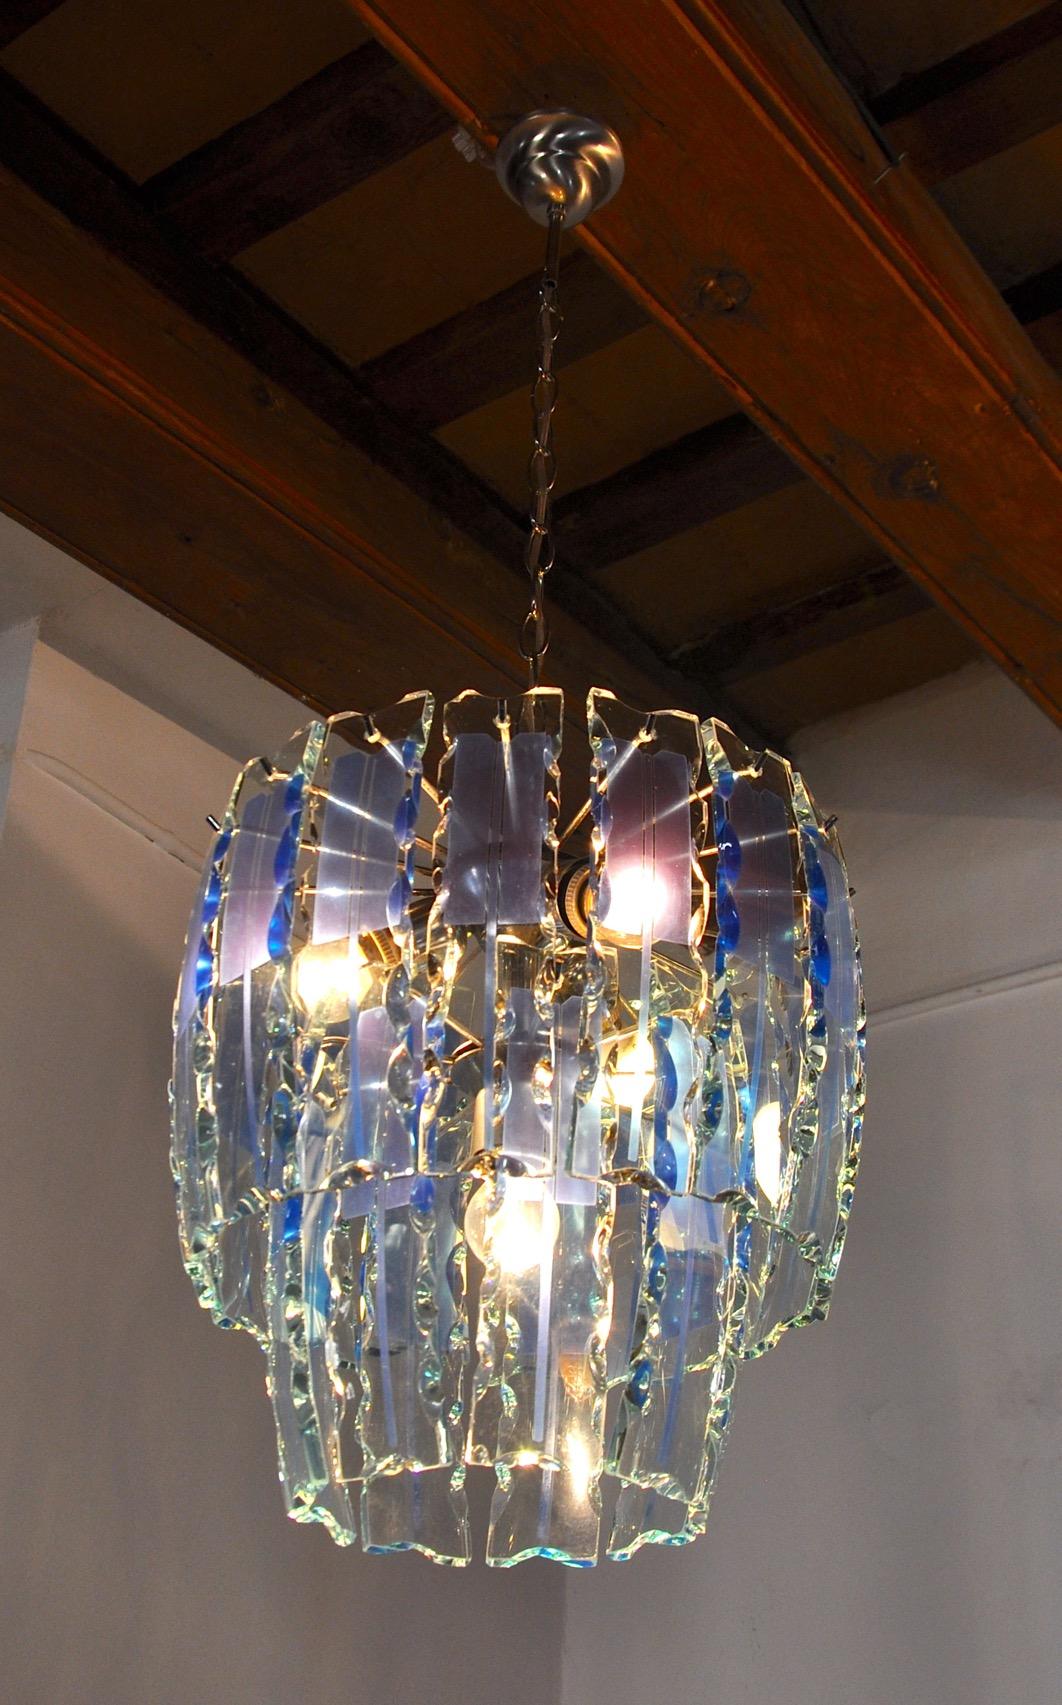 Zero Quattro chandelier designed and produced in the 70s in Murano, Italy.
Chromed structure and crystals cut in perfect condition.
Rare design object that will illuminate your interior perfectly.
Verified electricity, time marks consistent with the